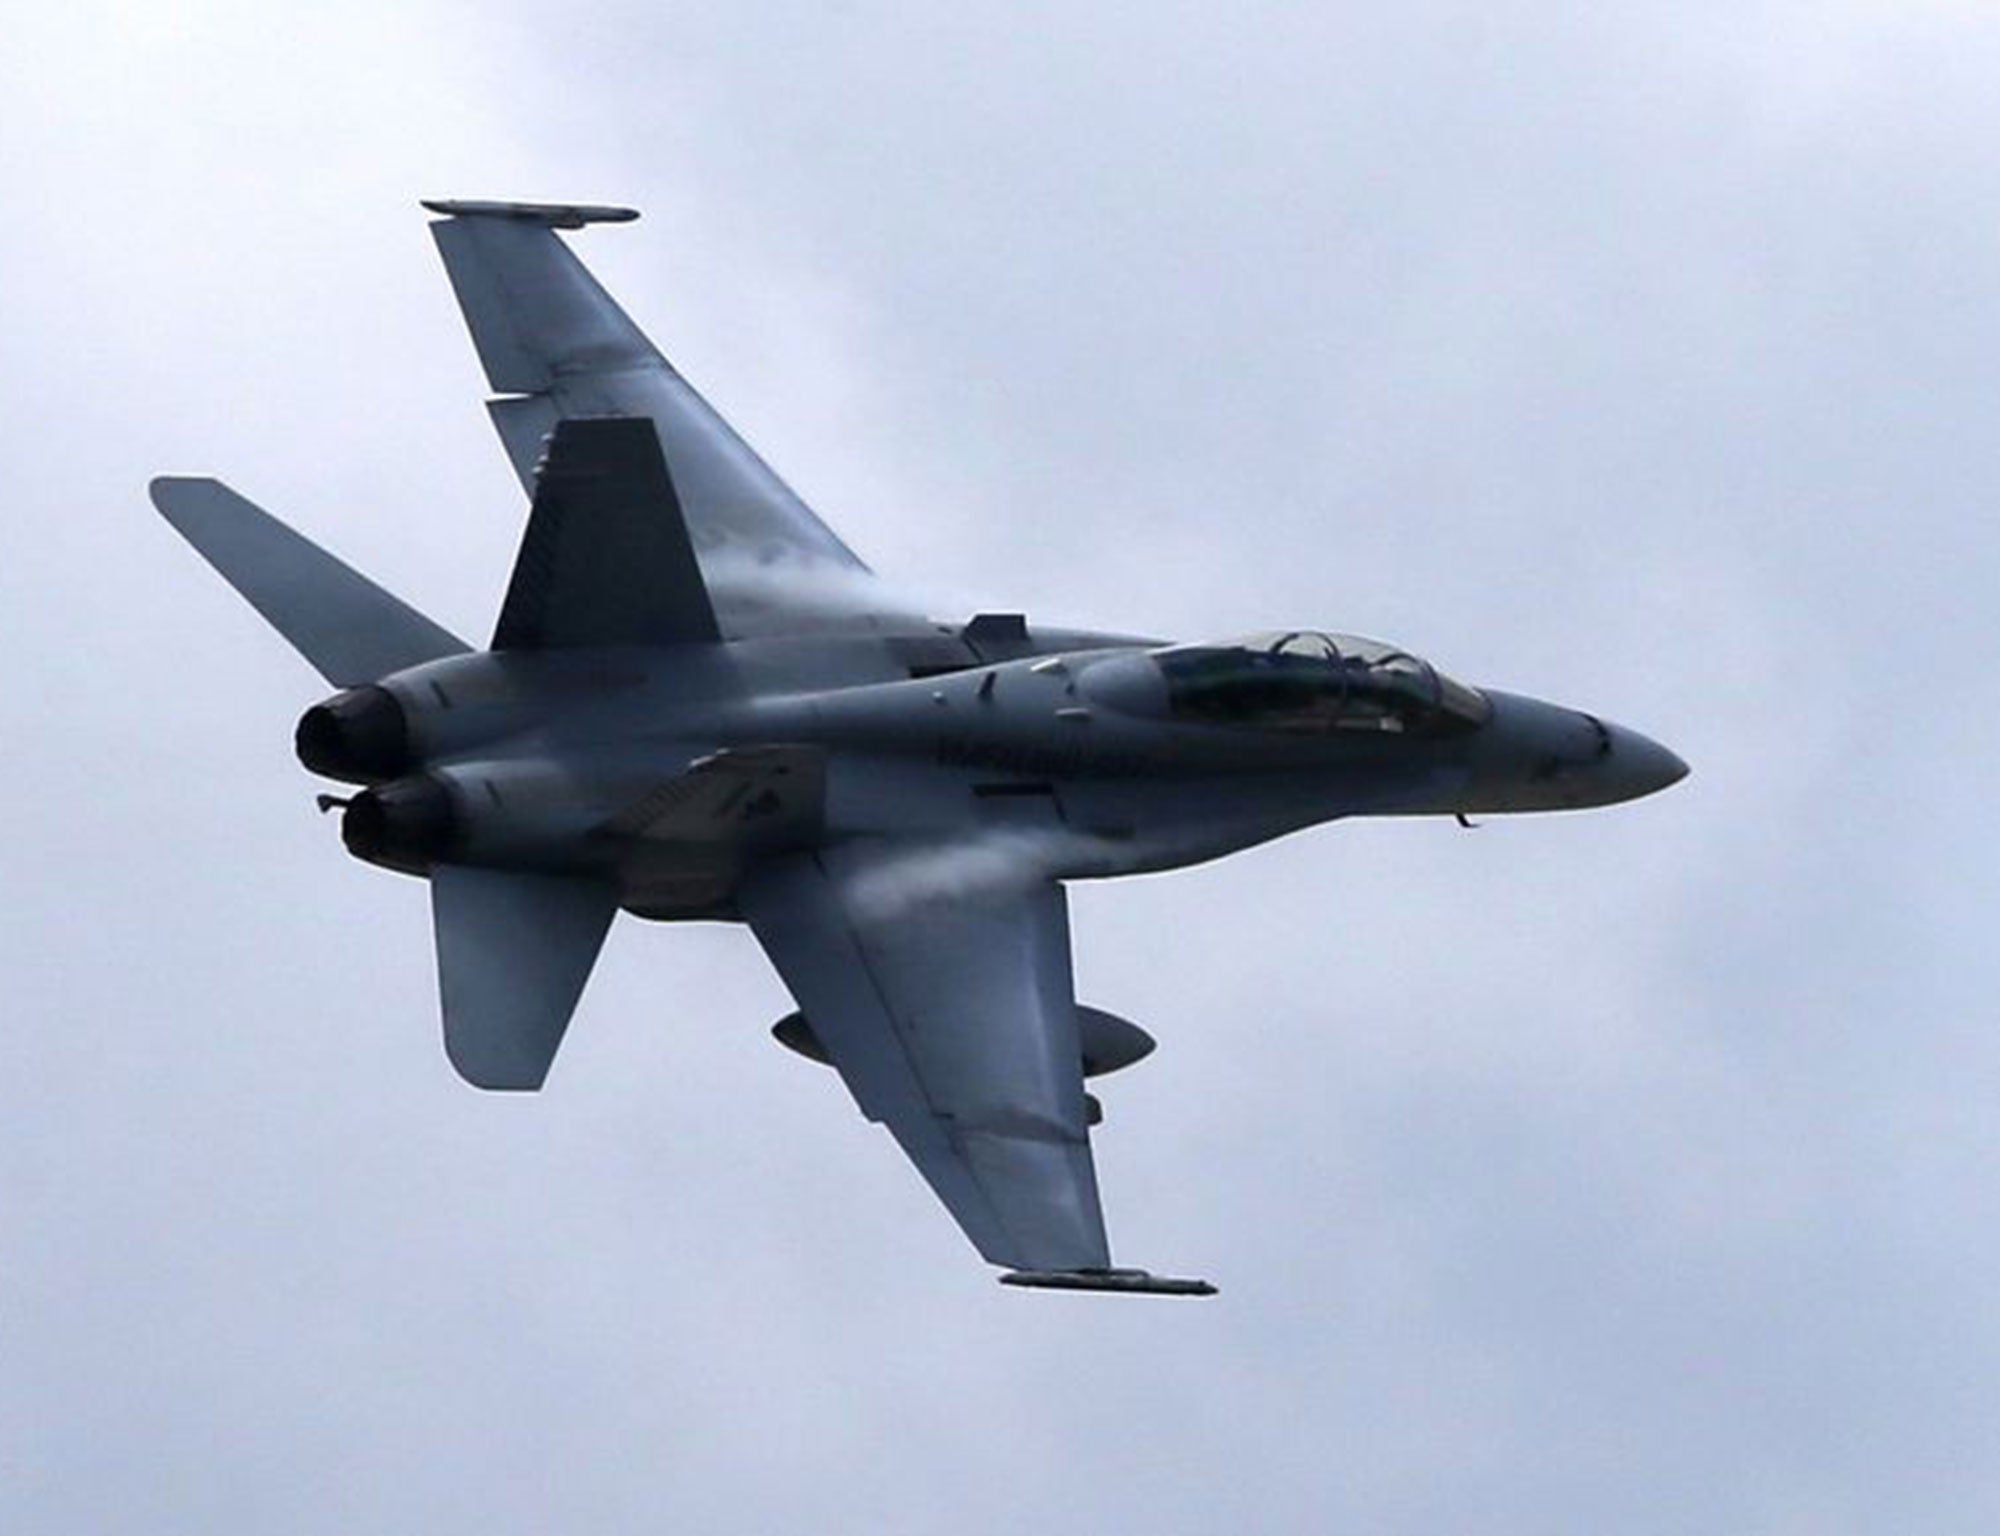 A US Marine F/A-18 Hornet jet. The Pentagon said America aircraft launched an attack on artillery used by militants against Kurdish forces defending the city of Irbil.